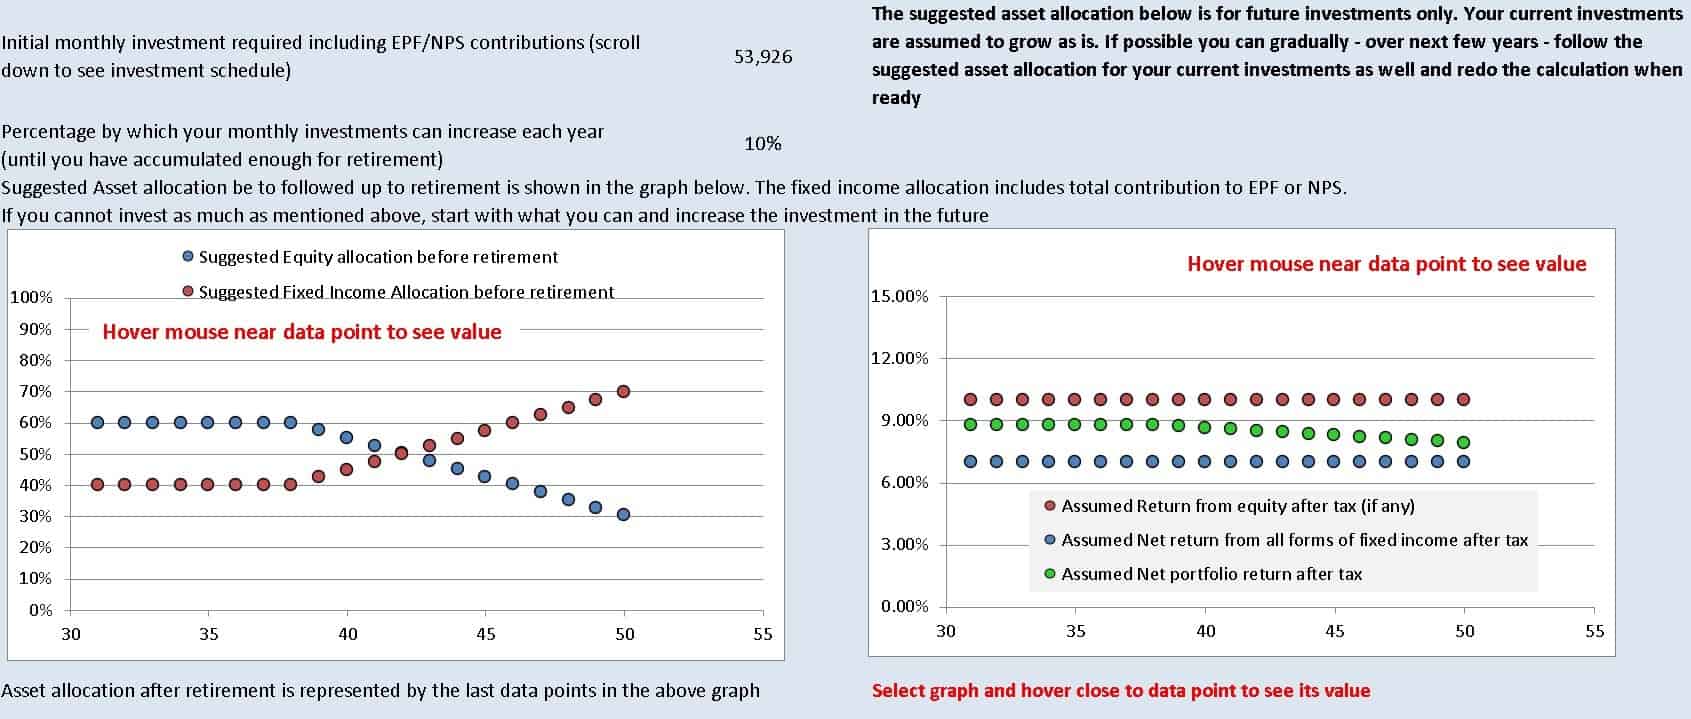 Screenshot from the freefincal robo advisory template showing the suggested asset allocation and change in assumed portfolio return